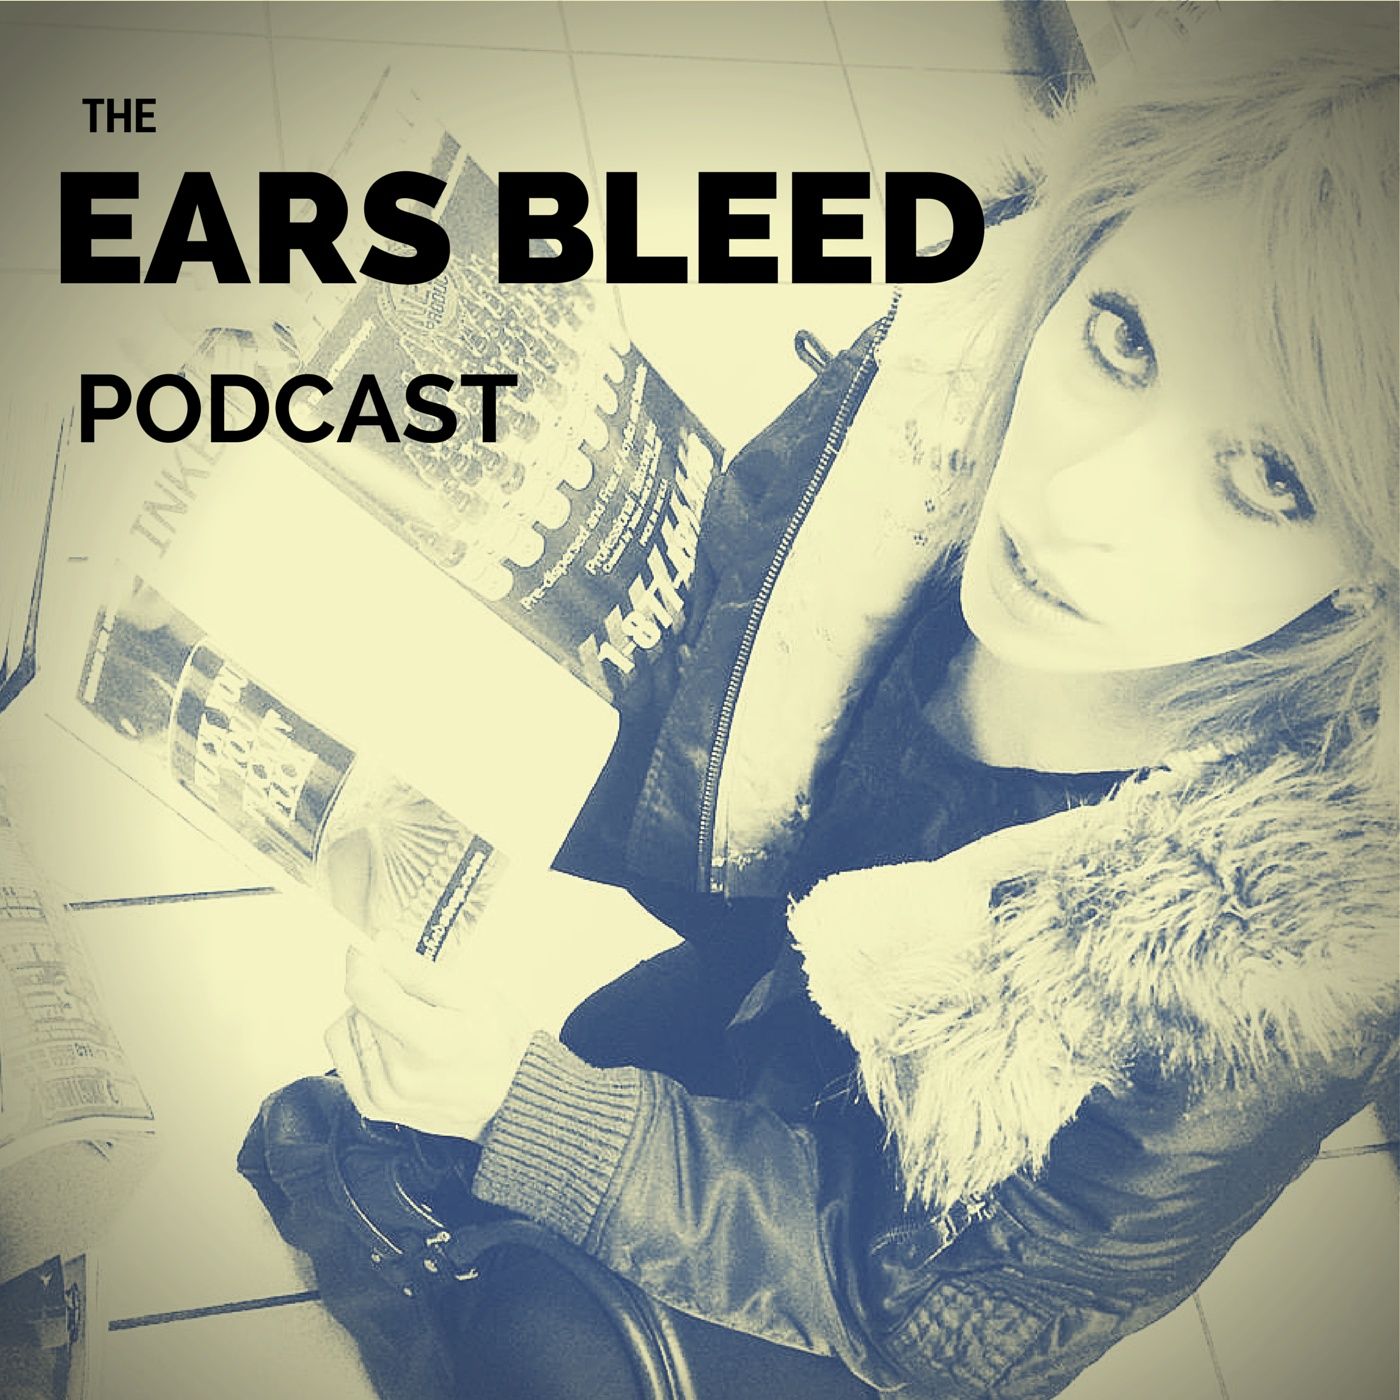 The Ears Bleed Podcast